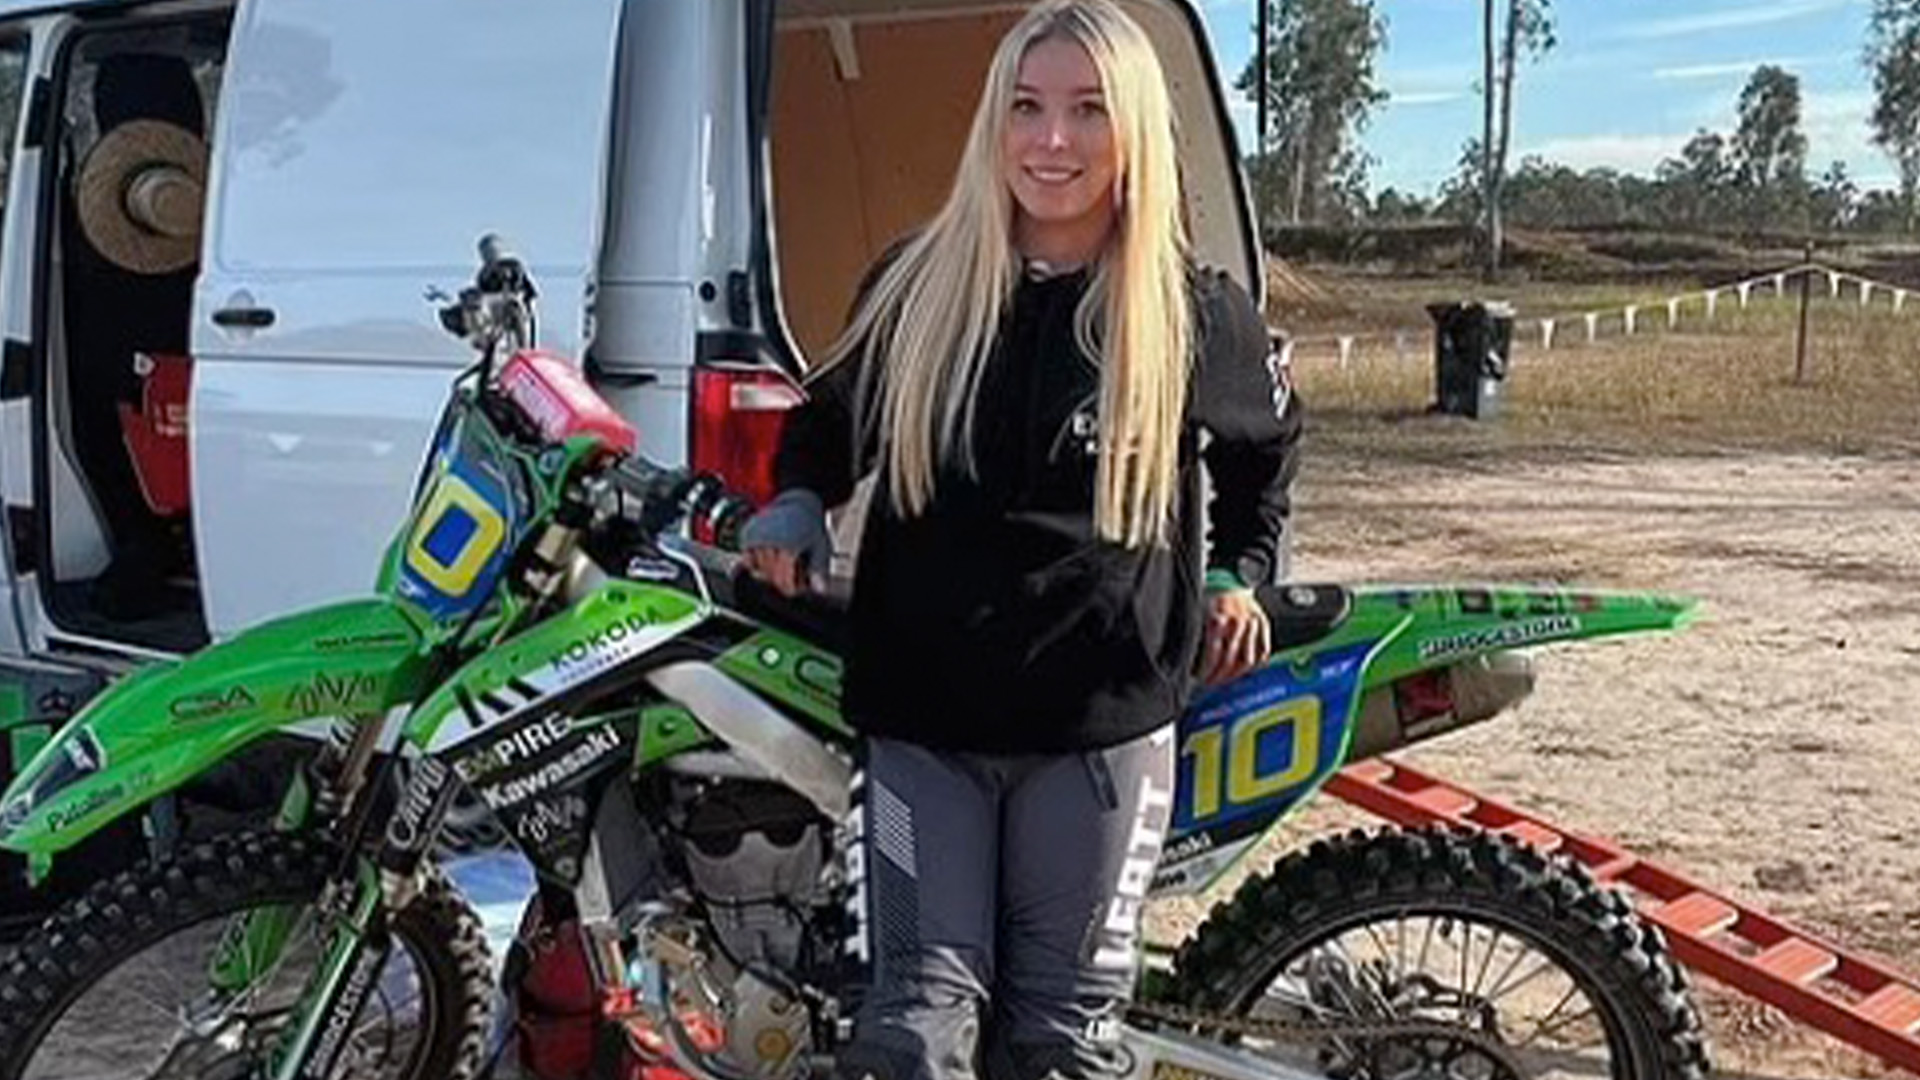 Teen motocross rider narrowly escapes death after shattering face in horror crash that saw her helmet filled with blood